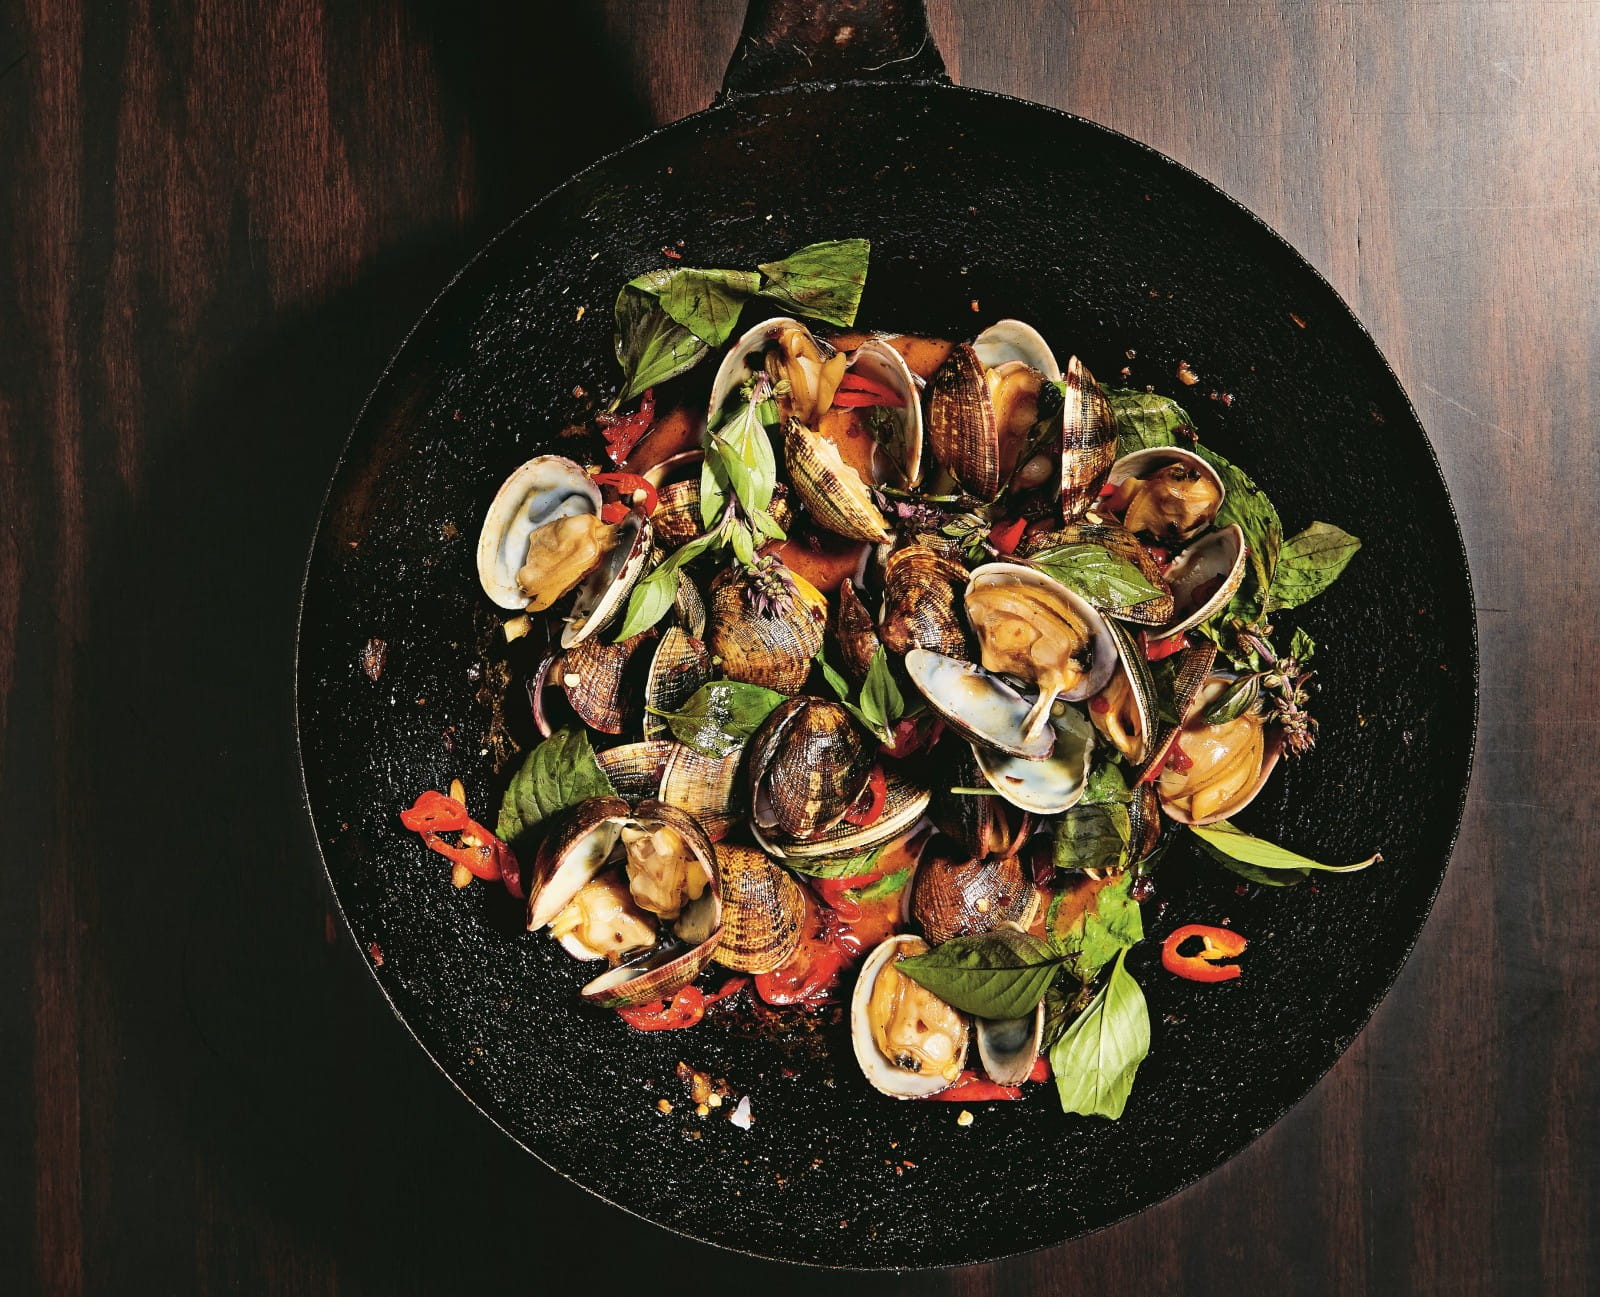 Clams Stir-fried with Roasted Chilli Paste